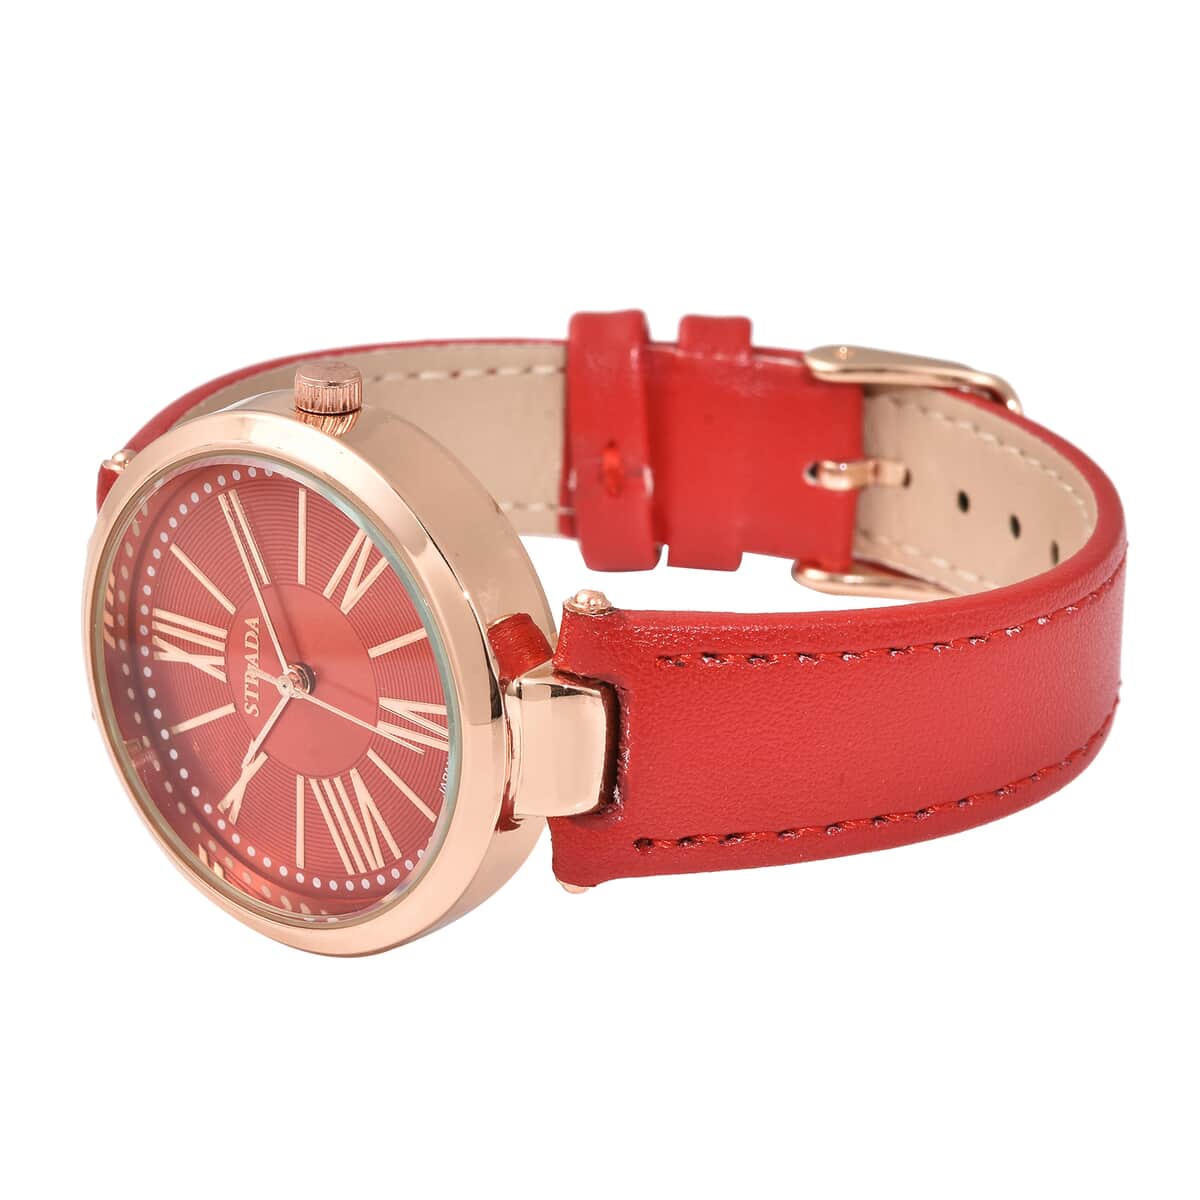 Strada Japanese Movement Watch with Red Vegan Leather Strap (34 mm) image number 4